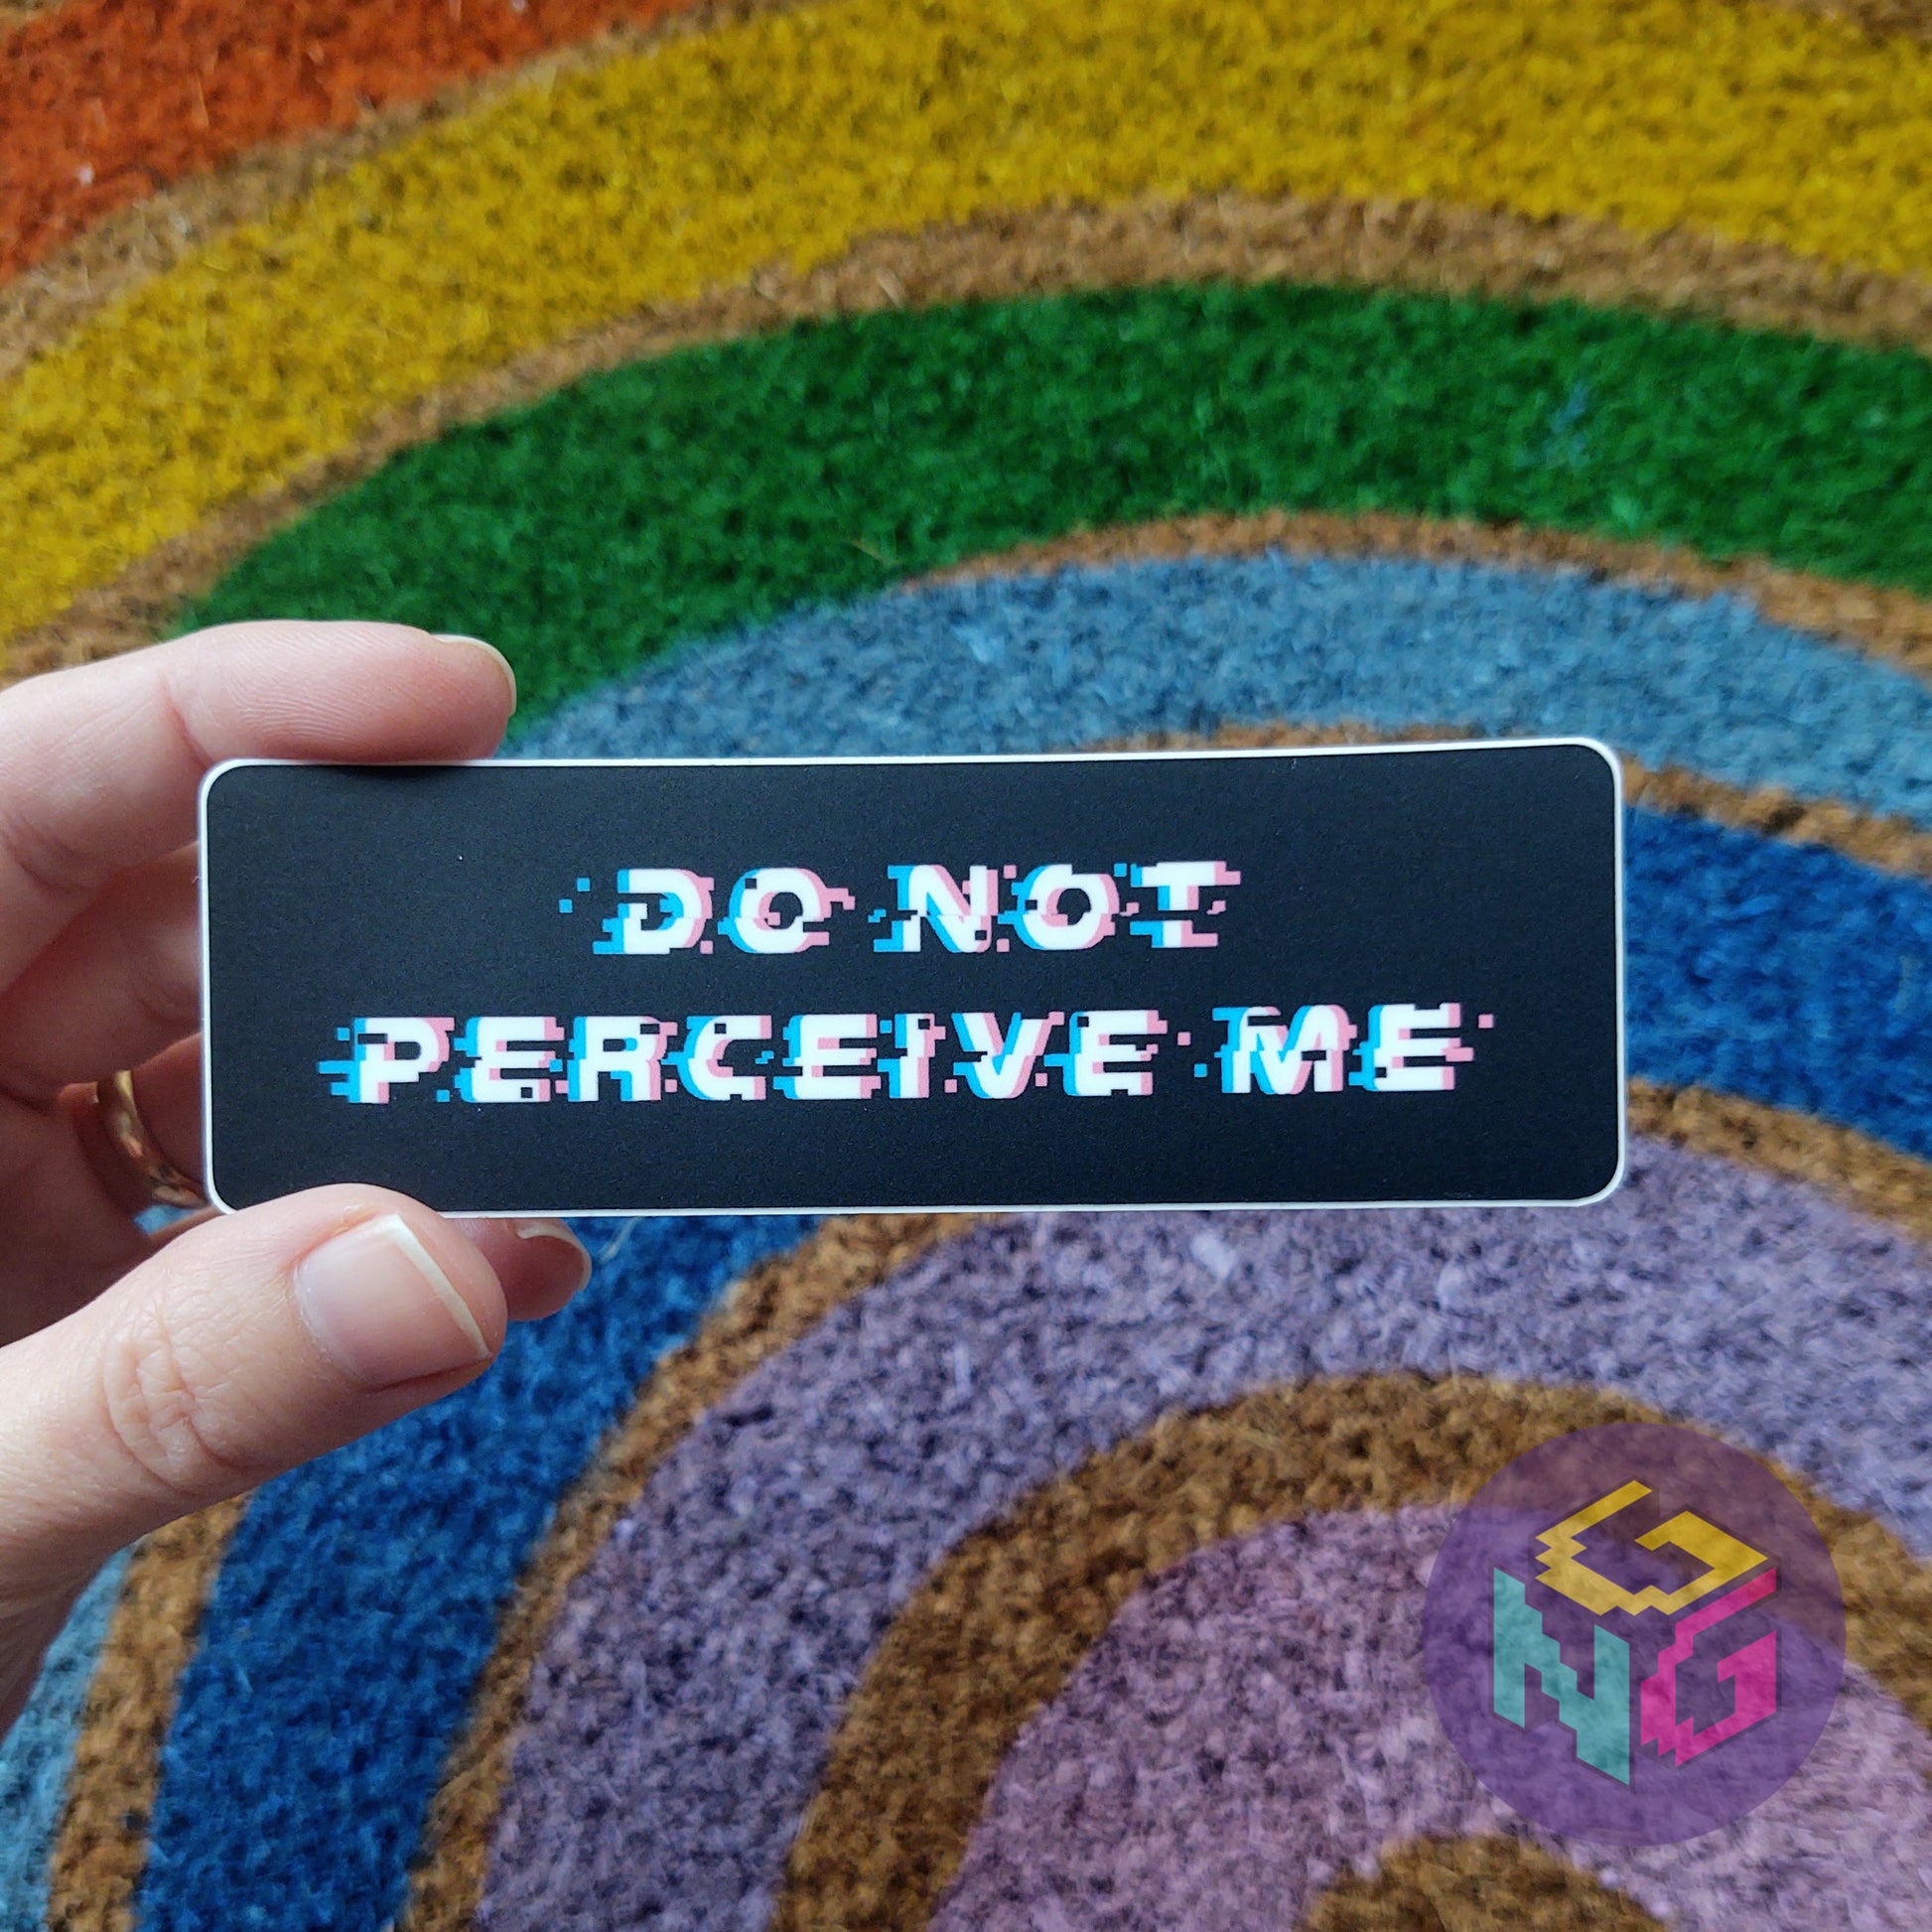 do not perceive me sticker held in front of a rainbow welcome mat